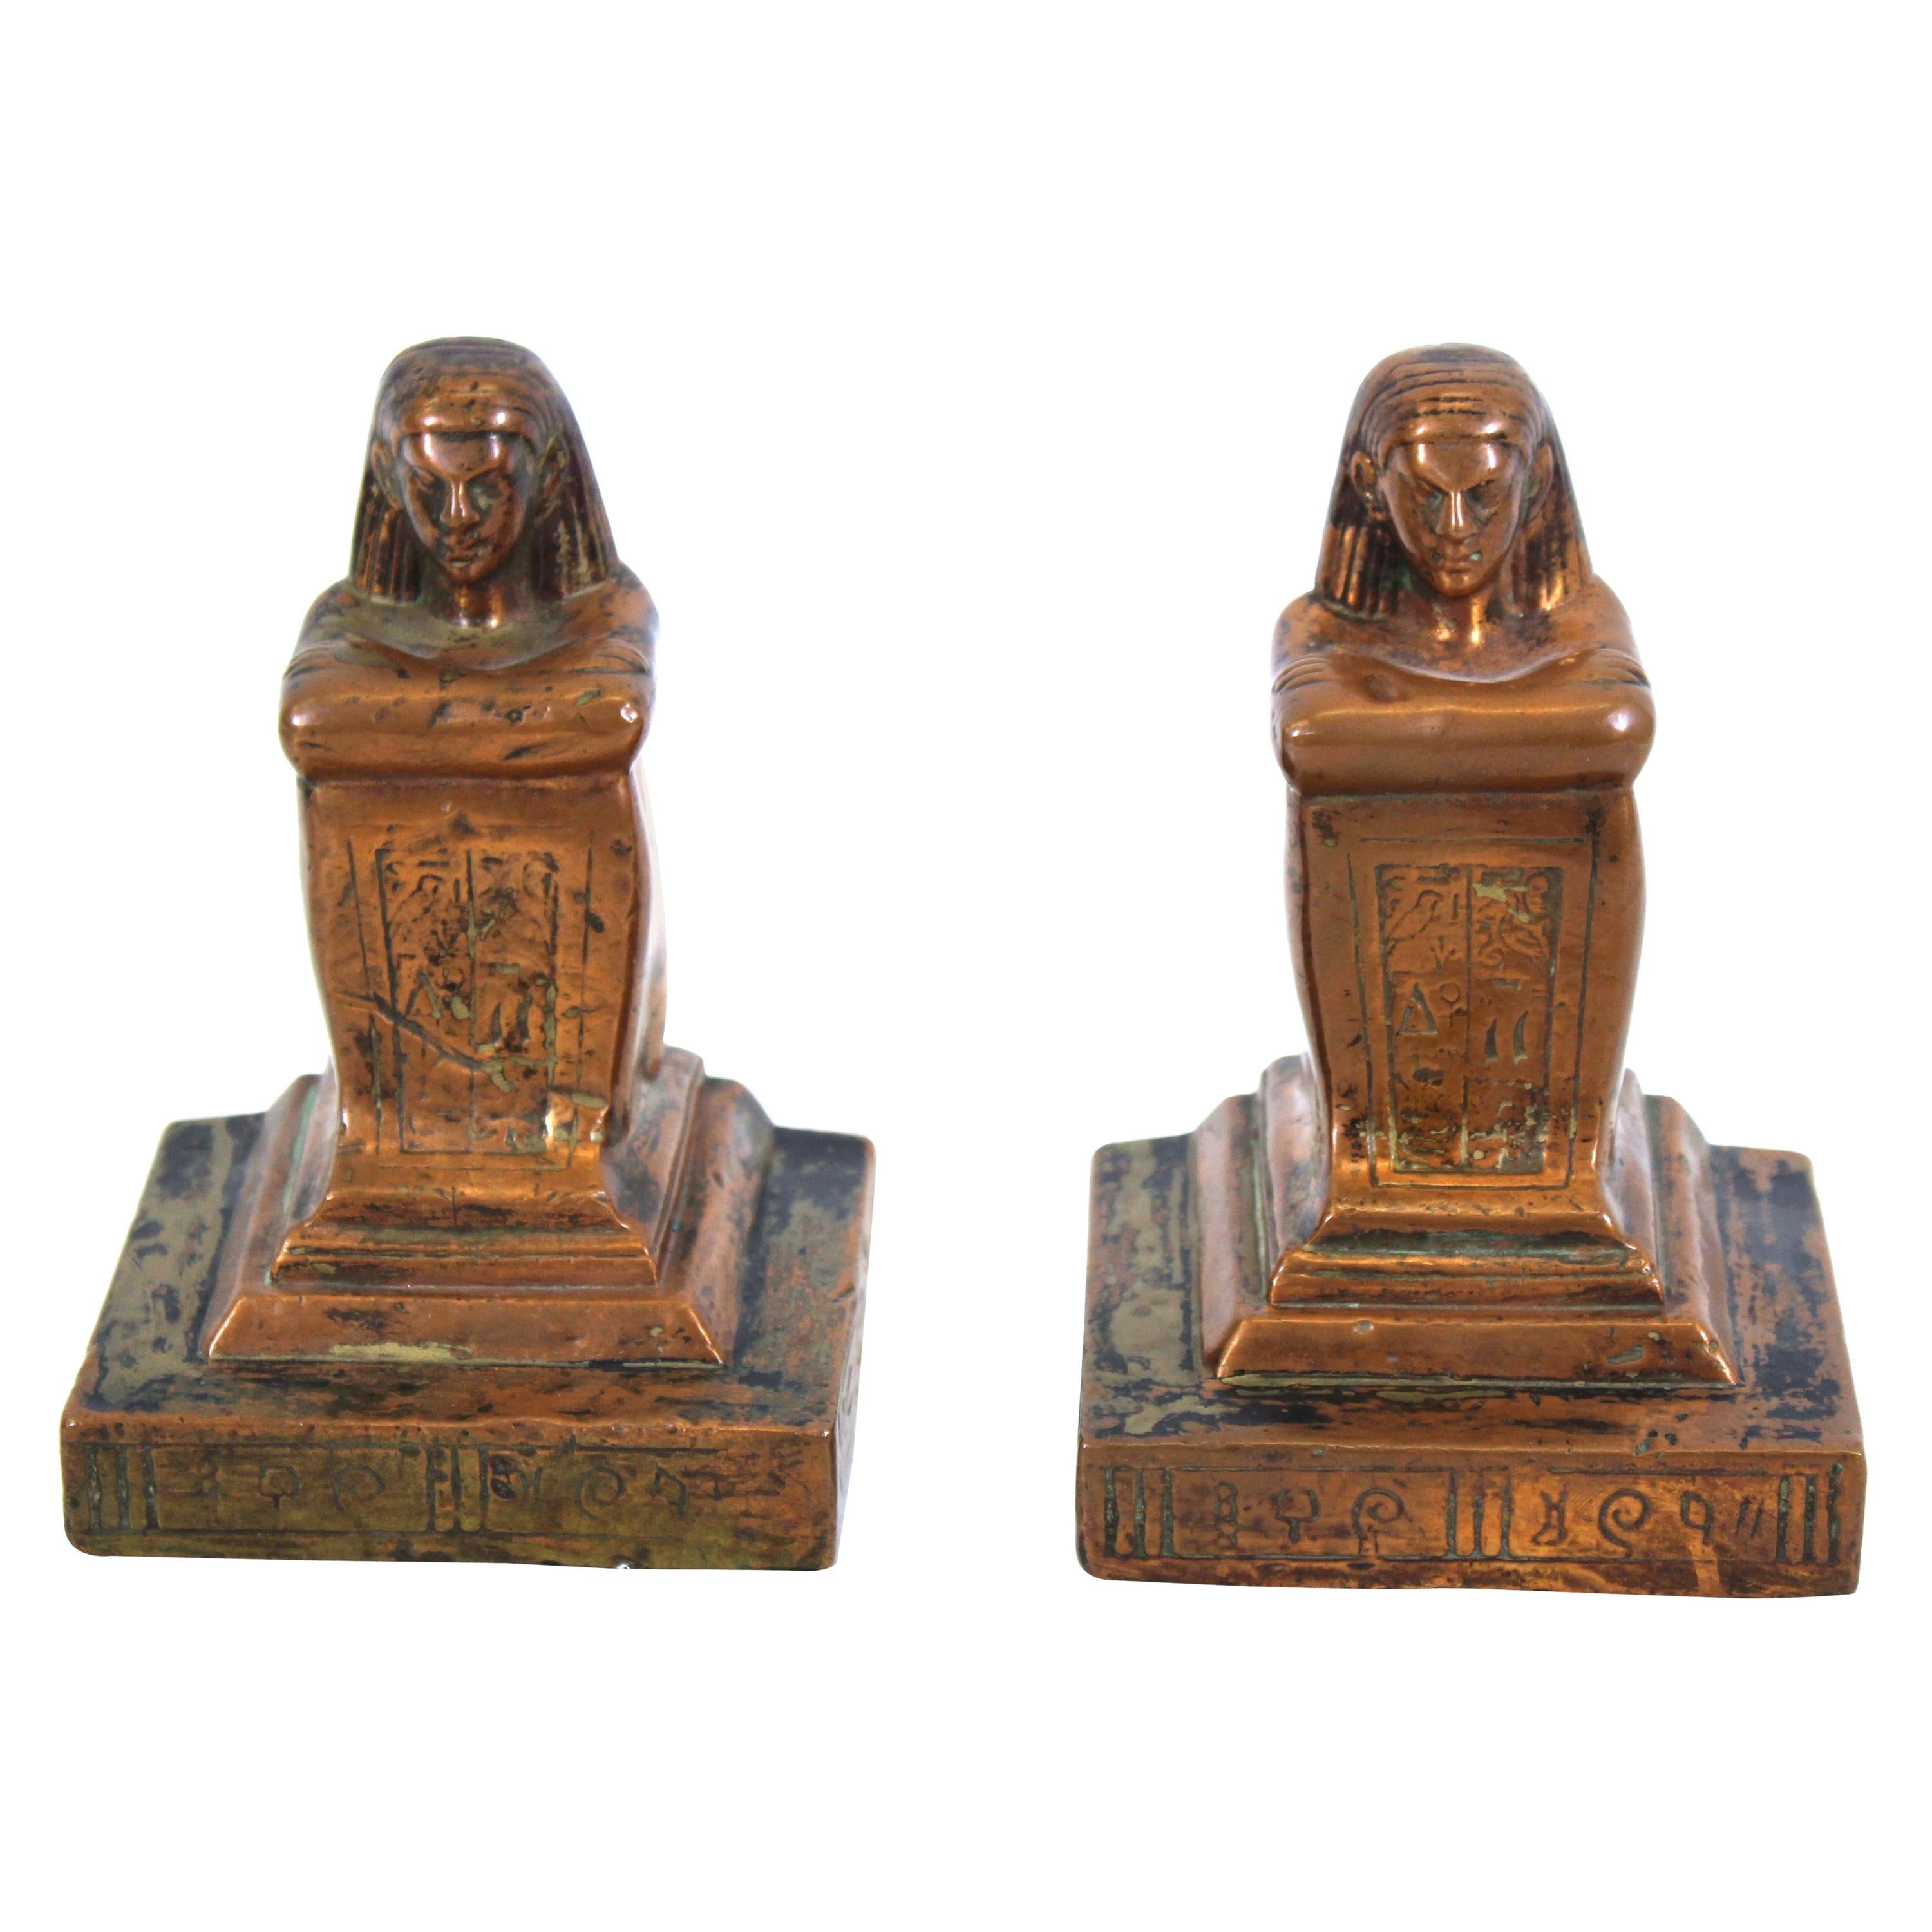 Egyptian Revival Style Figurative Brass Bookends